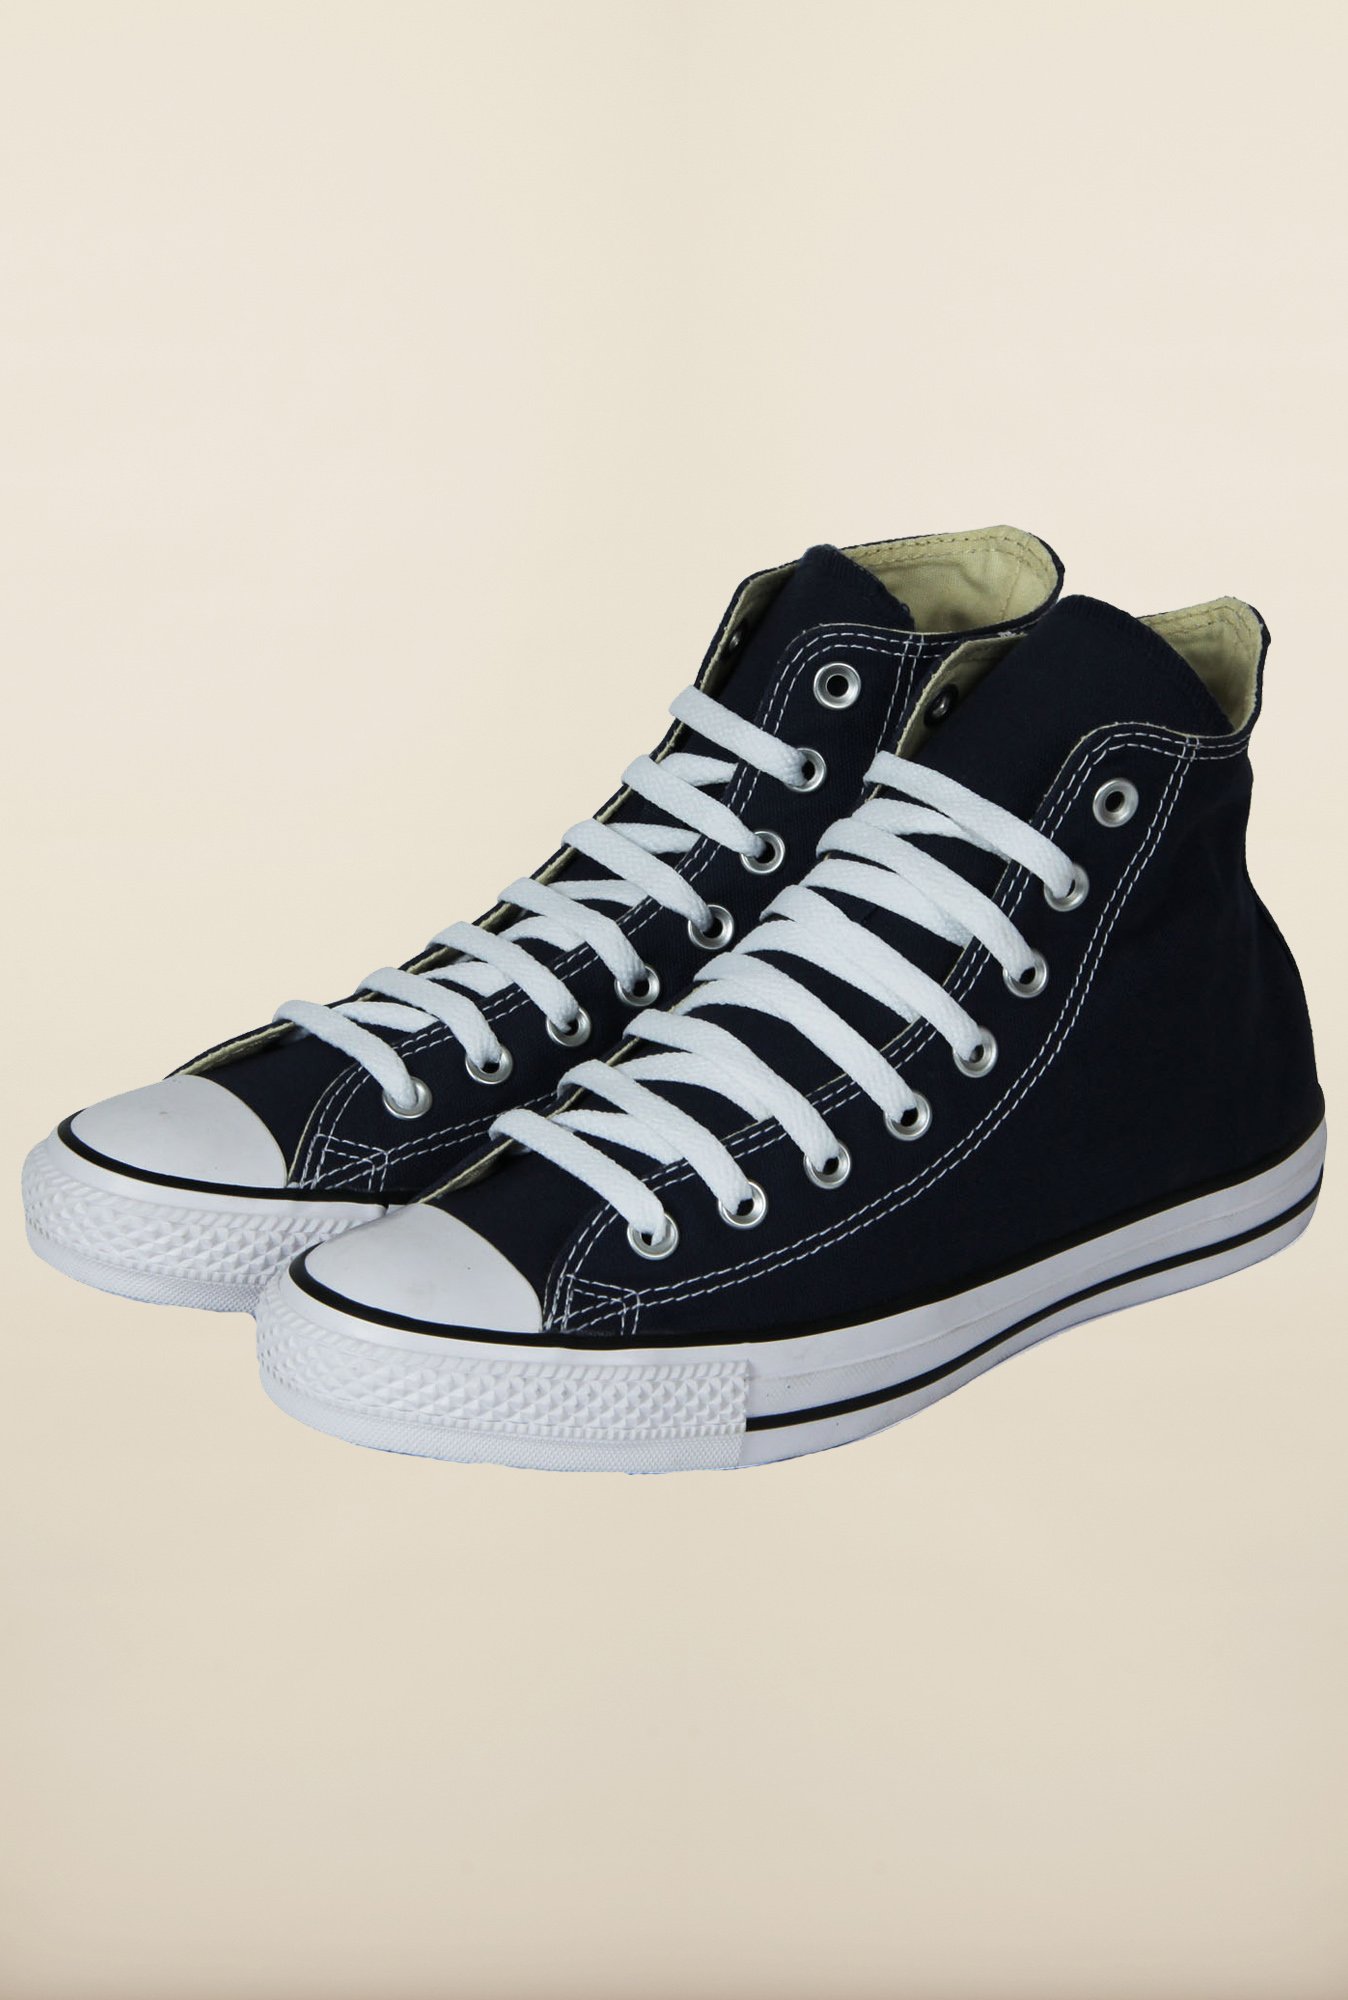 Converse  Buy Converse Shoes for Men and Women Online  Myntra